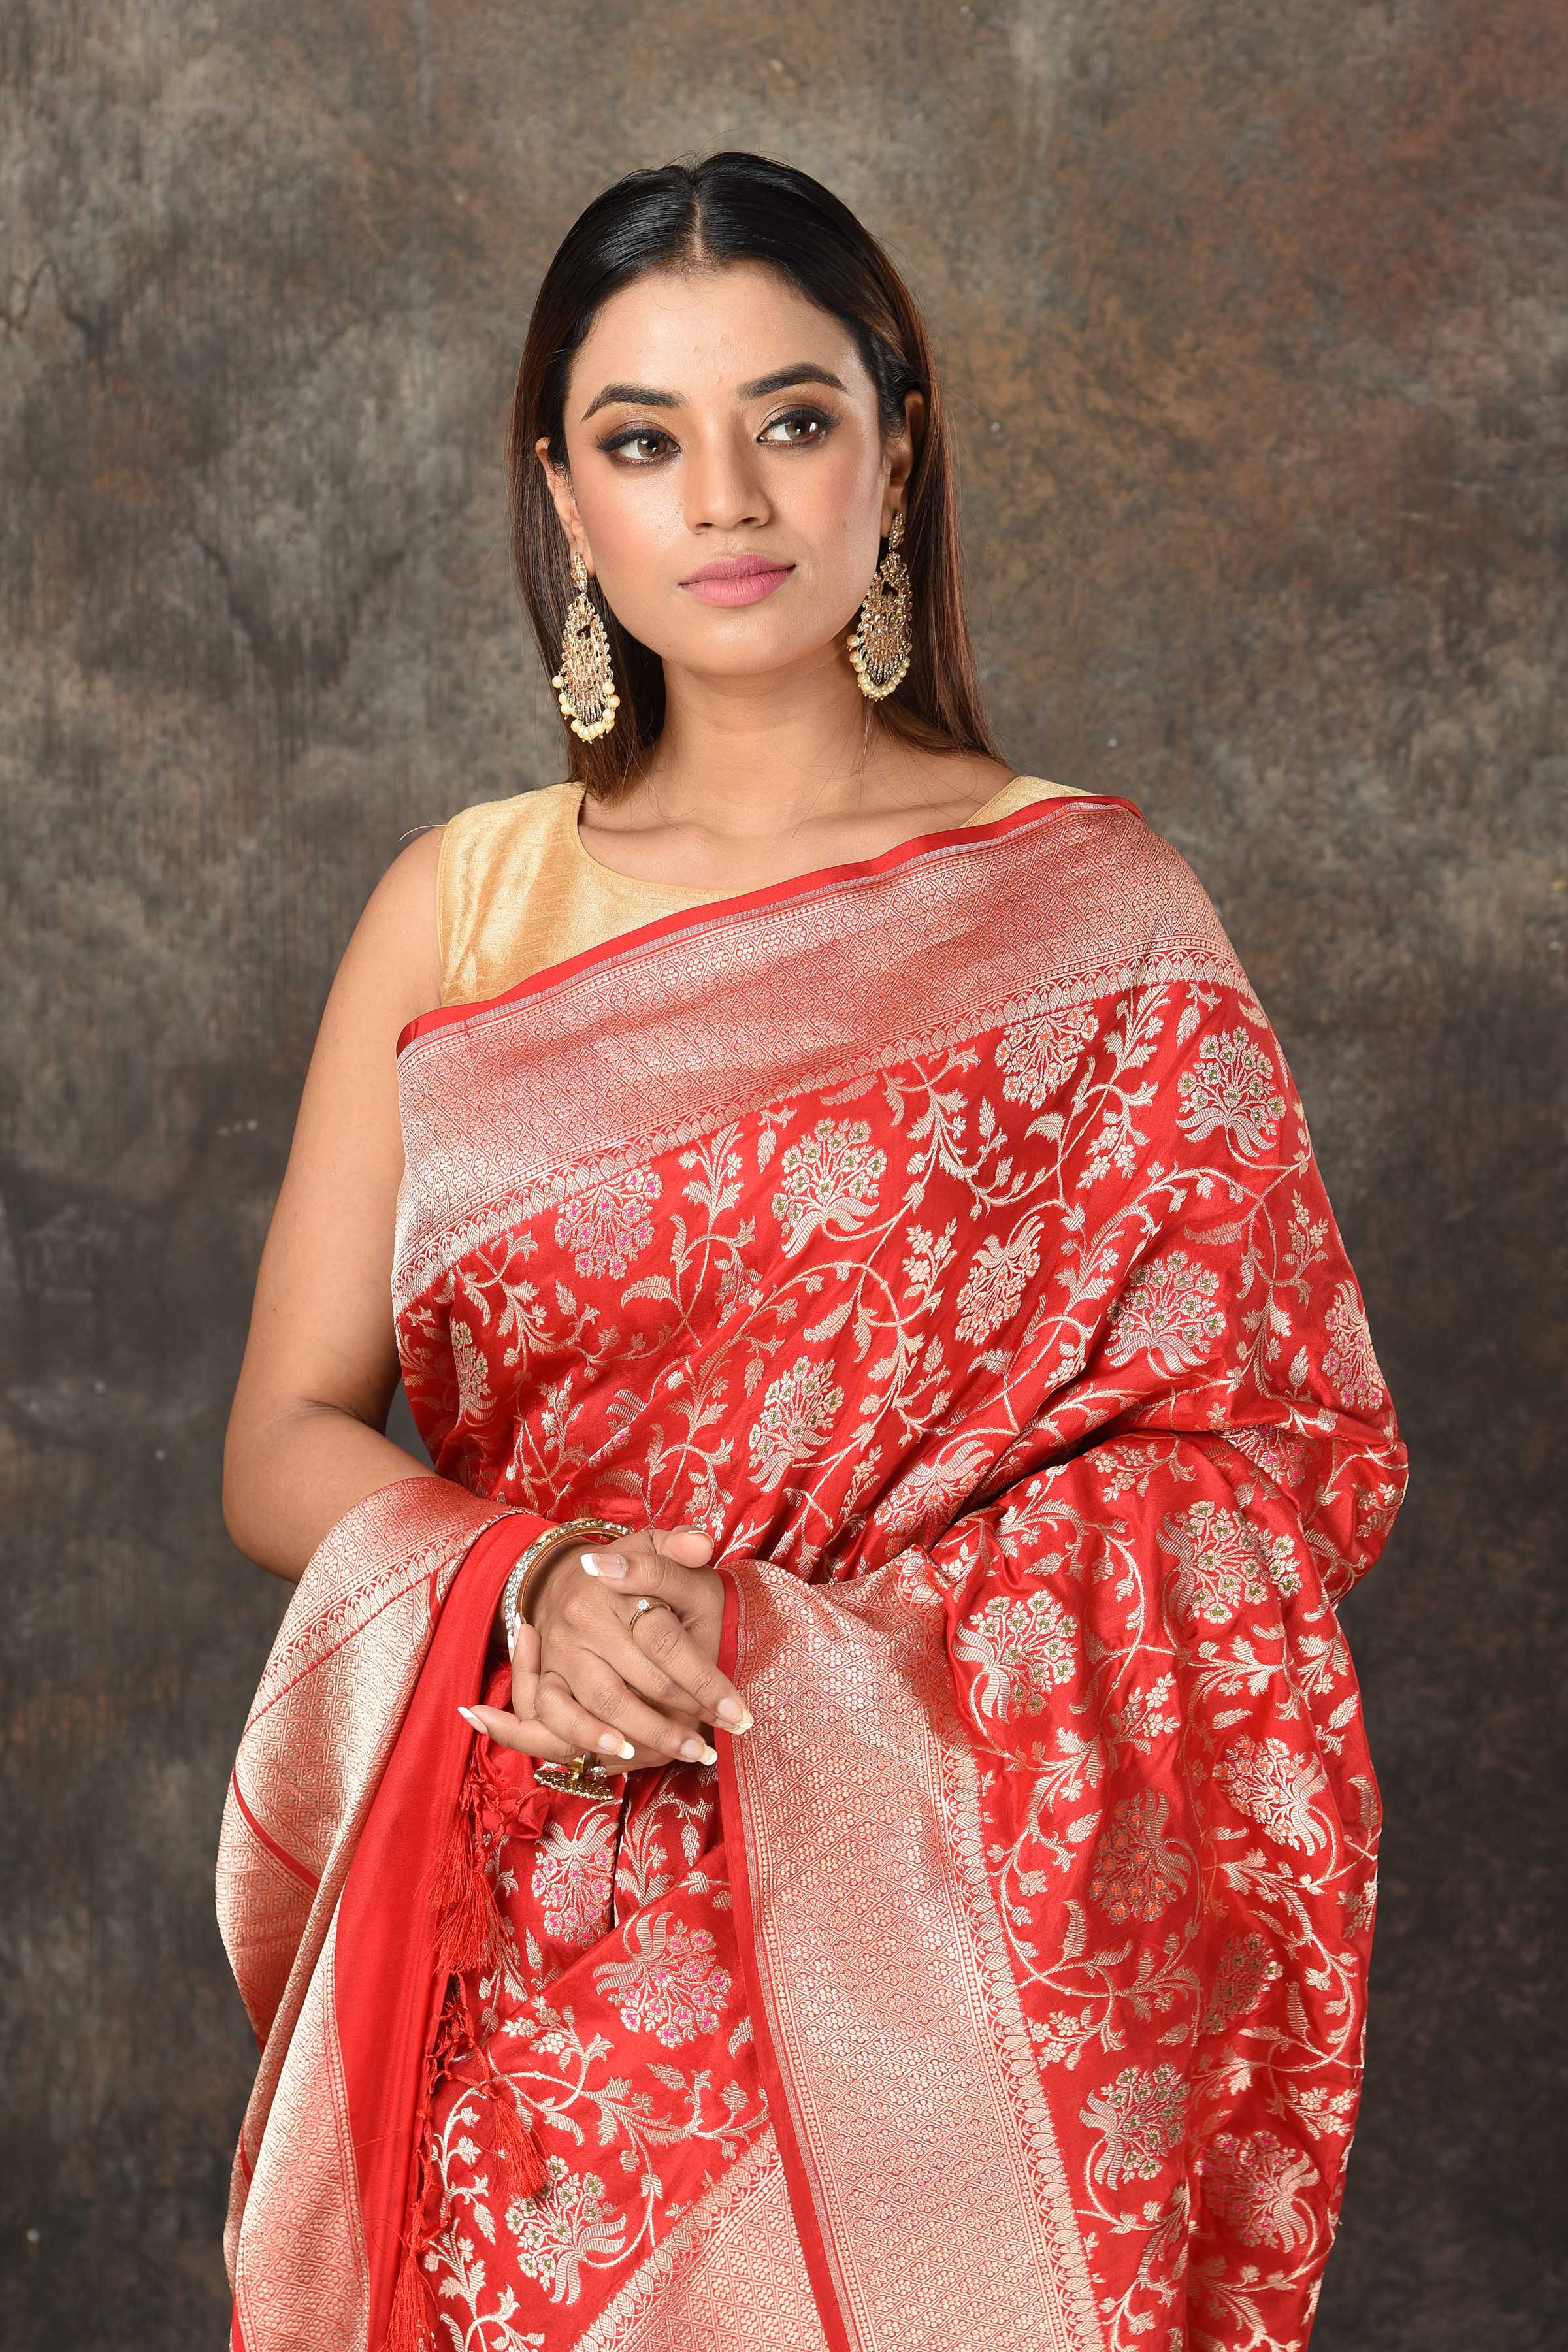 Shopzters - Look dazzling in this banarasi saree paired... | Facebook